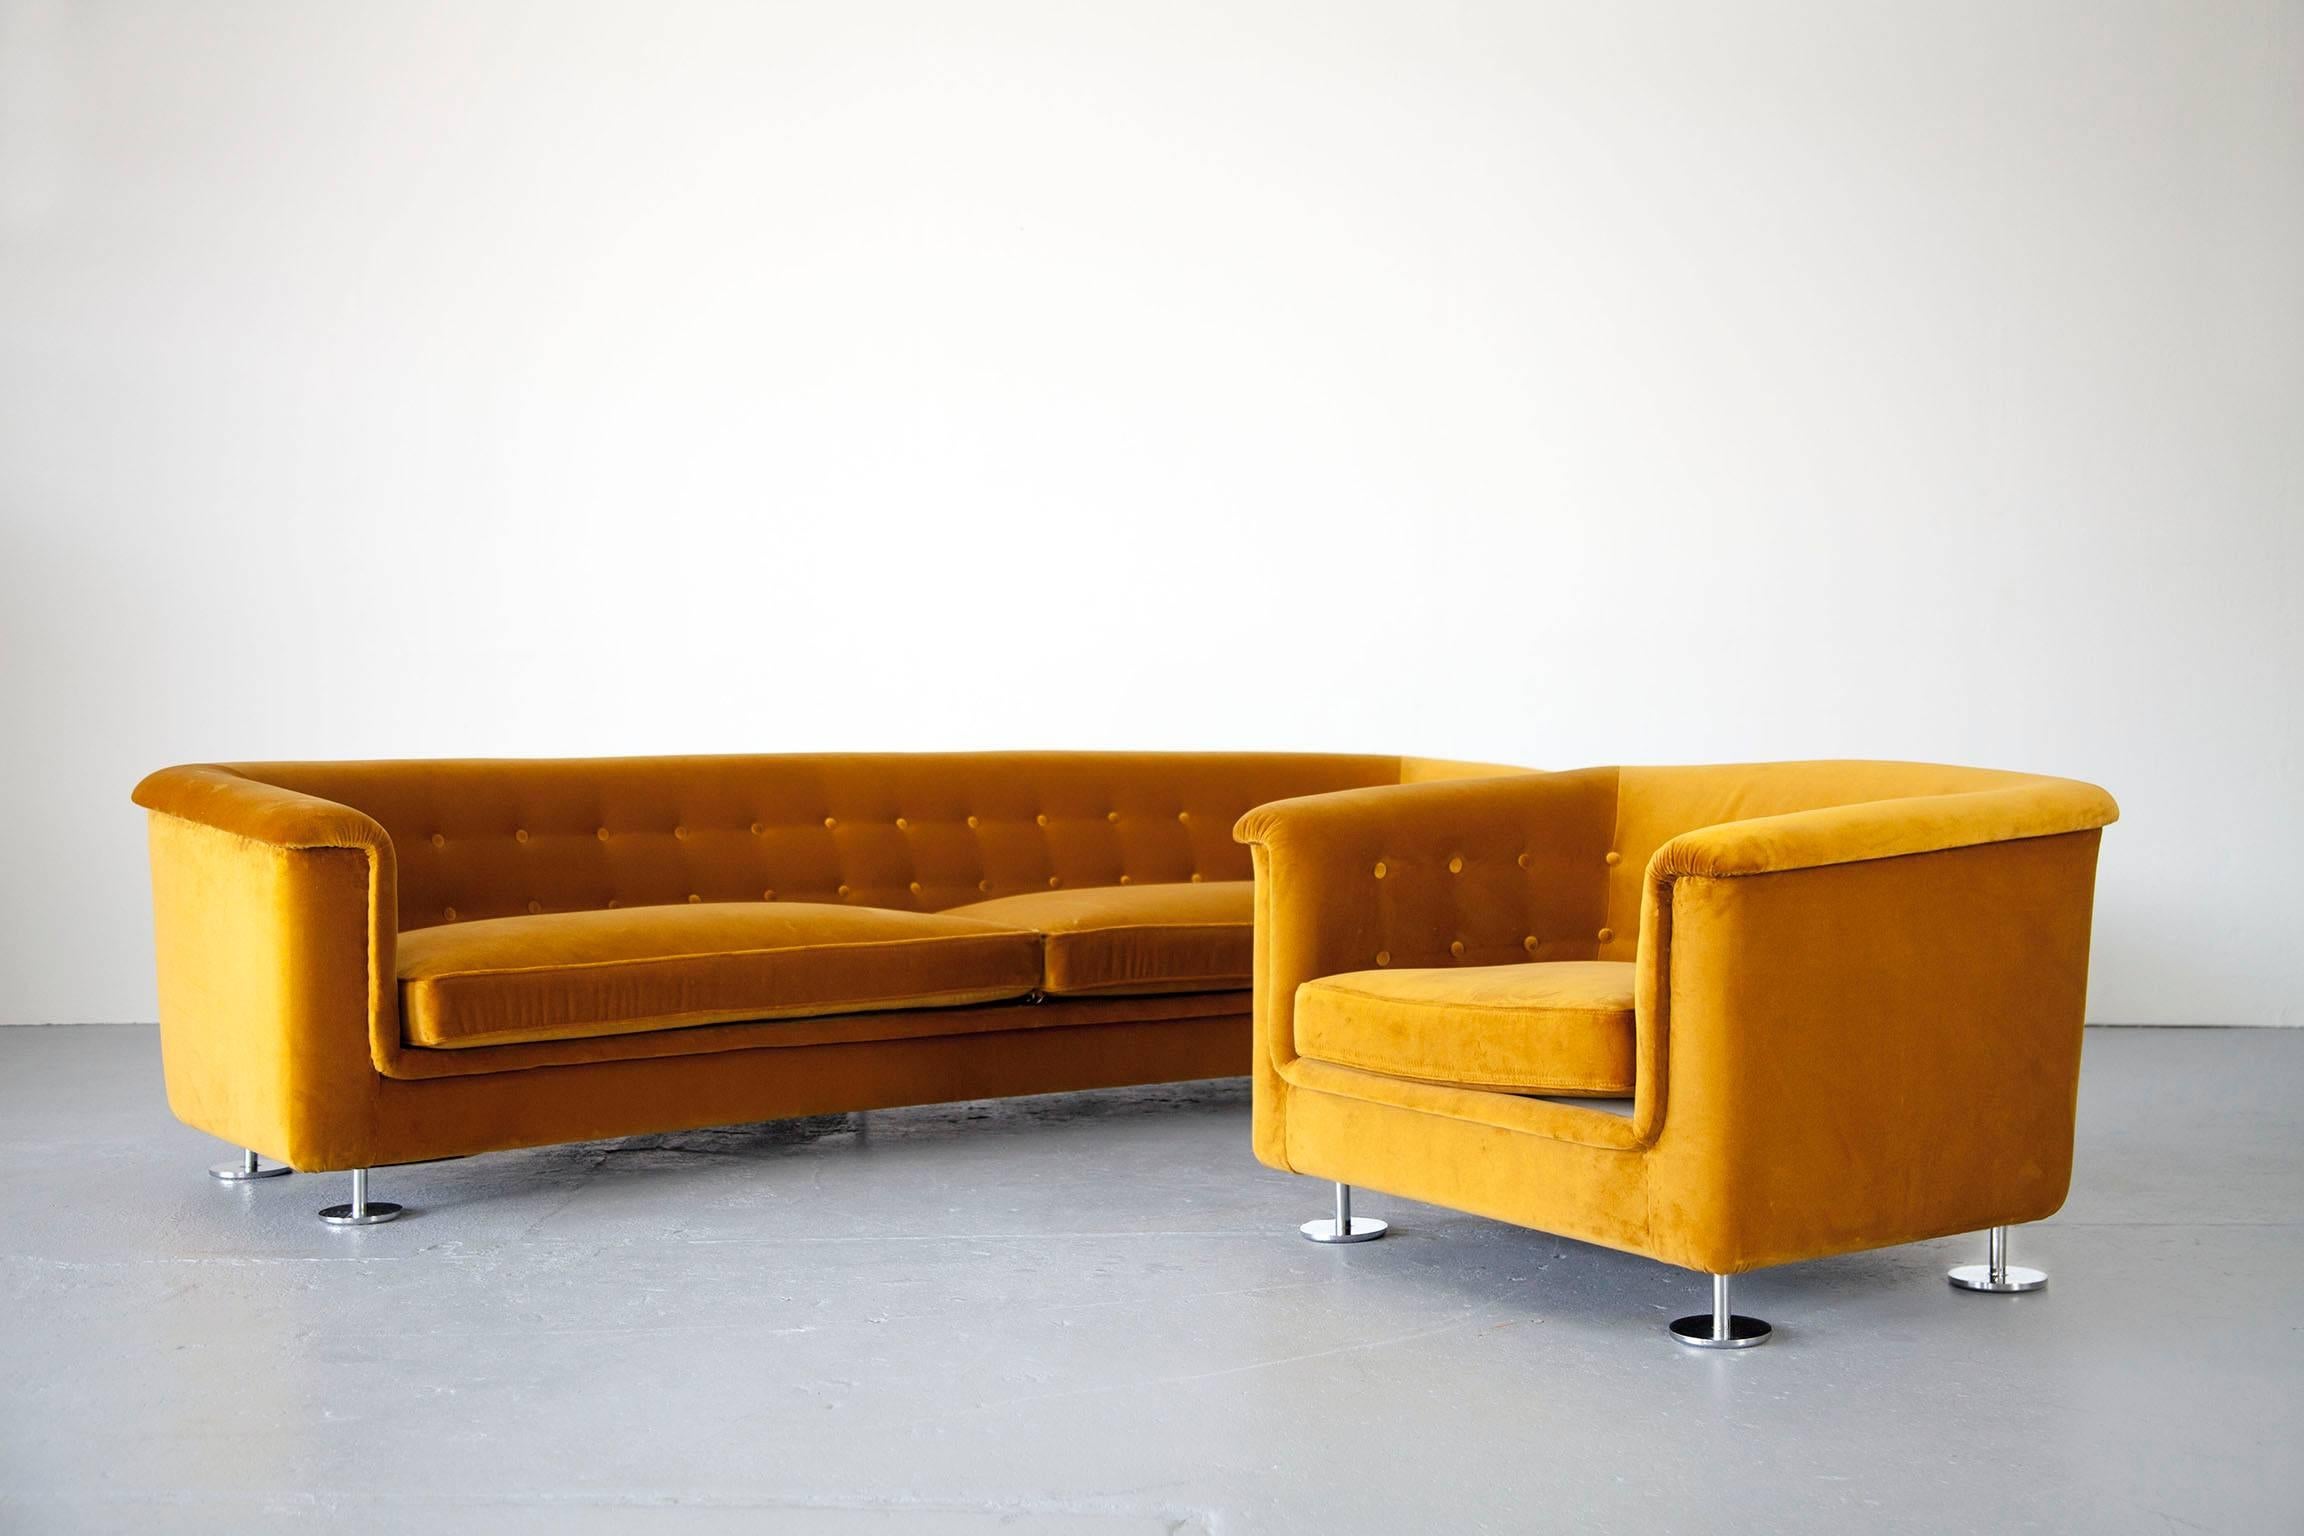 Sophisticated seating group made by Hans Kaufeld. Both pieces have new upholstery and are covered in mustard colored velvet.

Dimensions: 
Chair: D 85 cm; W 91 cm; H 63 cm; SH 35 cm.
Sofa: D 90 cm; W 262 cm; H 62 cm; SH 35 cm.
 